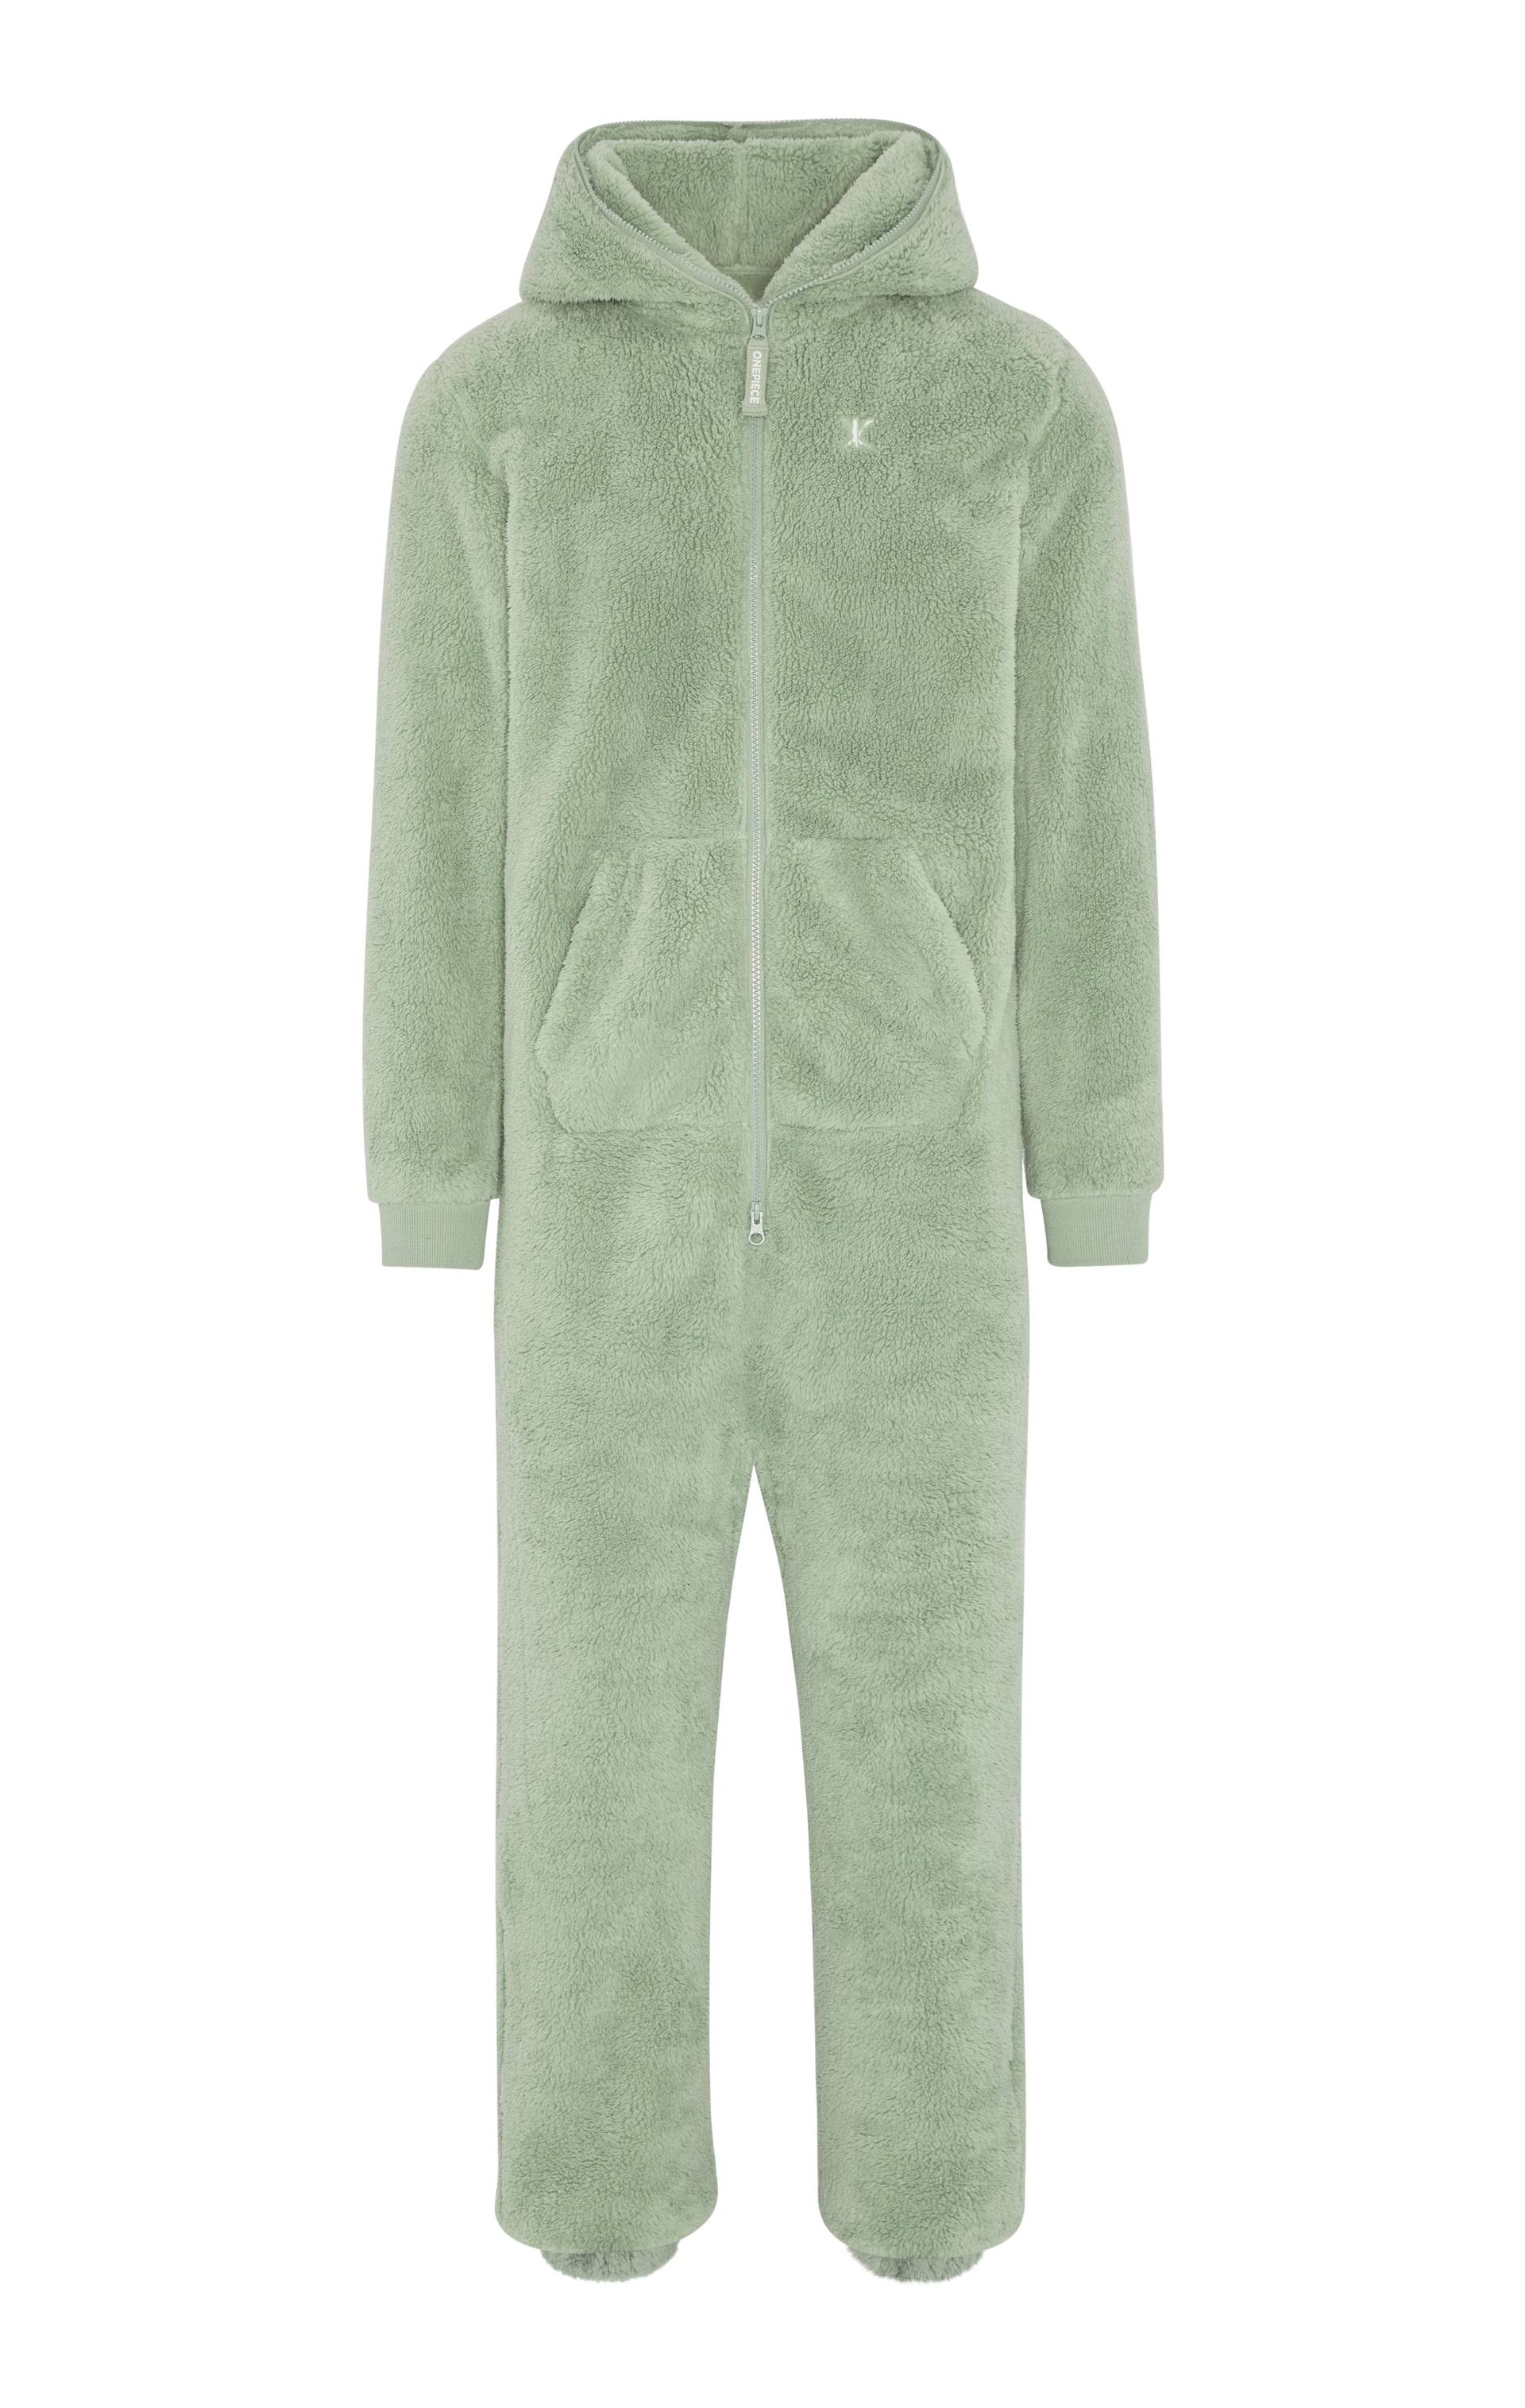 Onepiece The Puppy Jumpsuit Green - 1